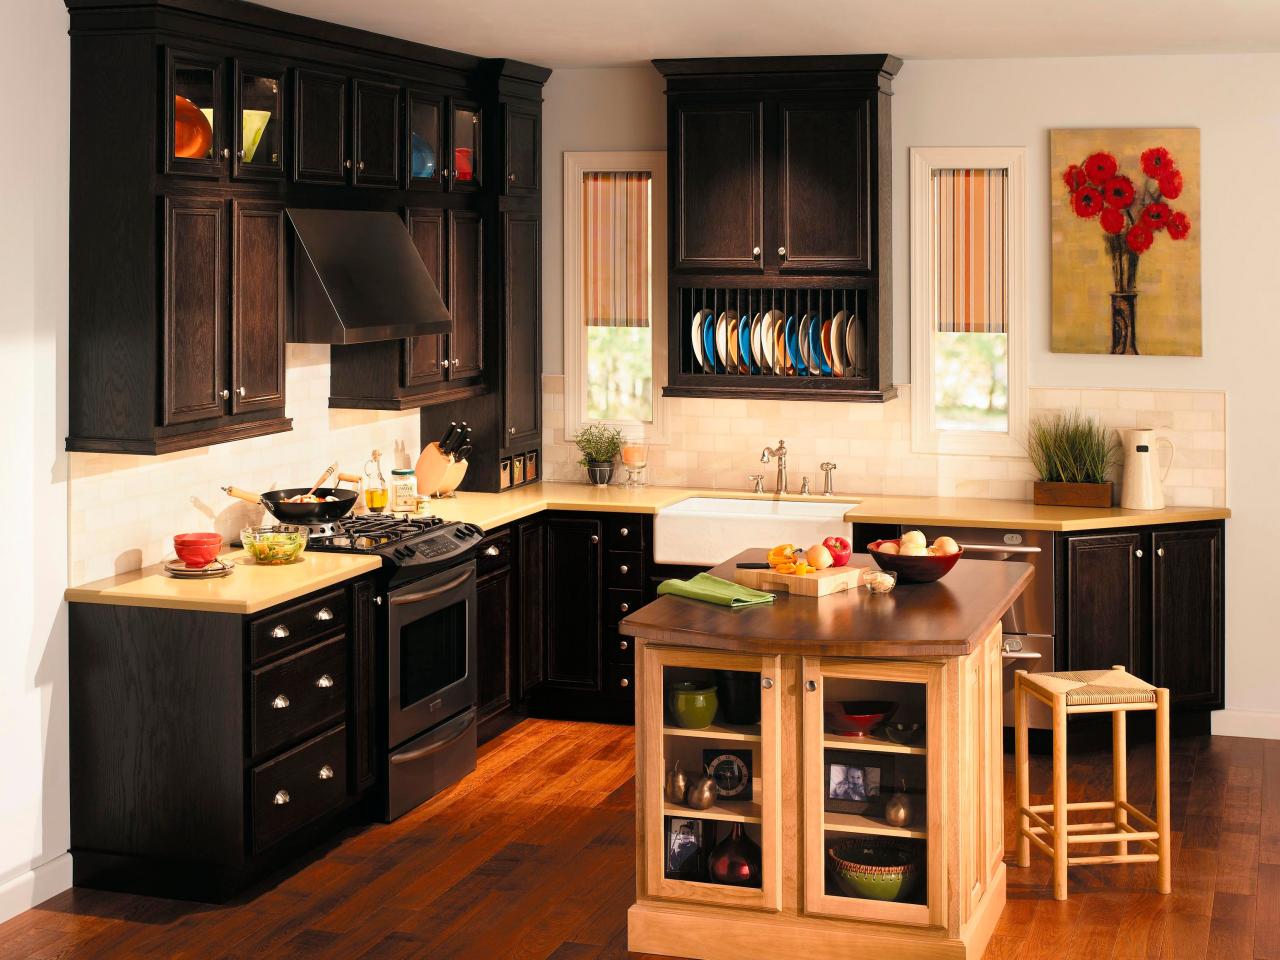 Cabinet Types Which Is Best For You, What Are High Quality Kitchen Cabinets Made Of